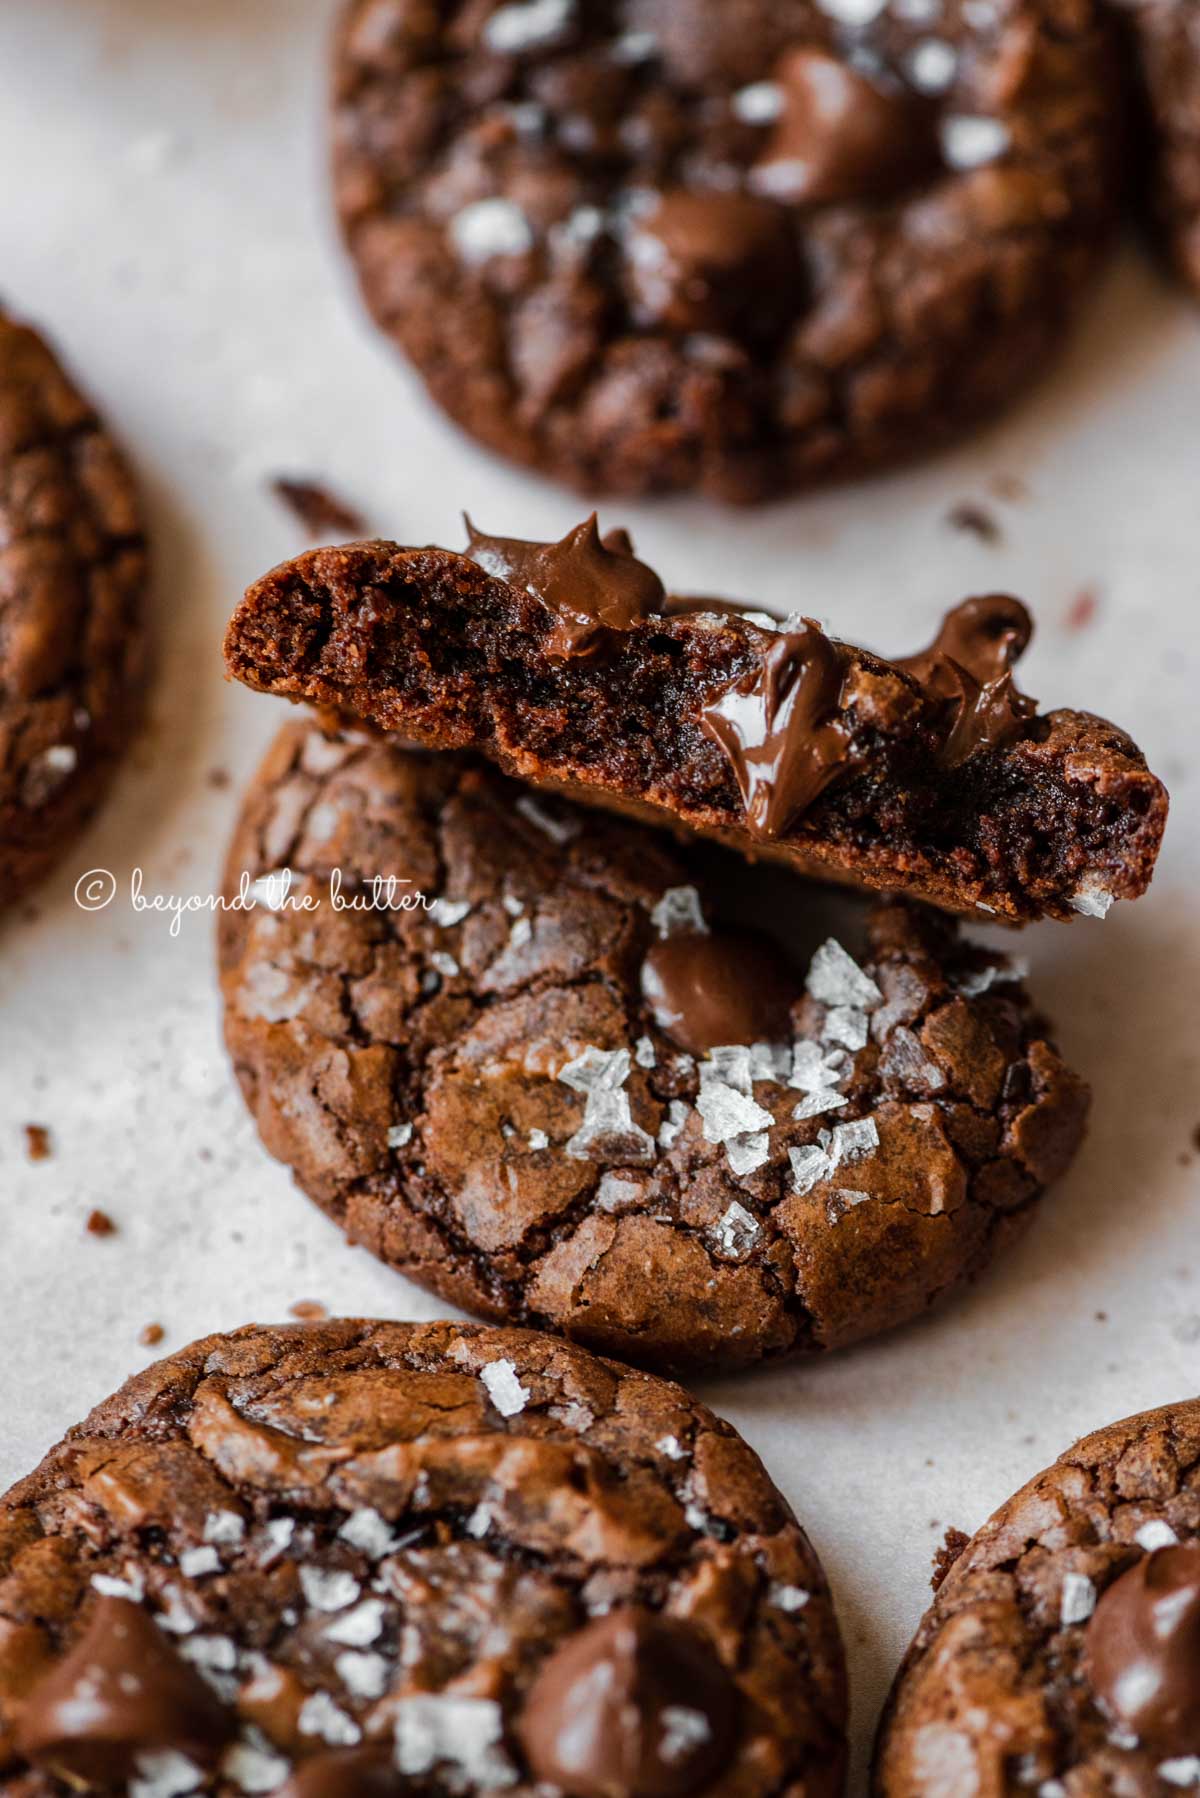 Salted brownie cookie split in half showing with melted chocolate chips peaking through | All Images © Beyond the Butter®